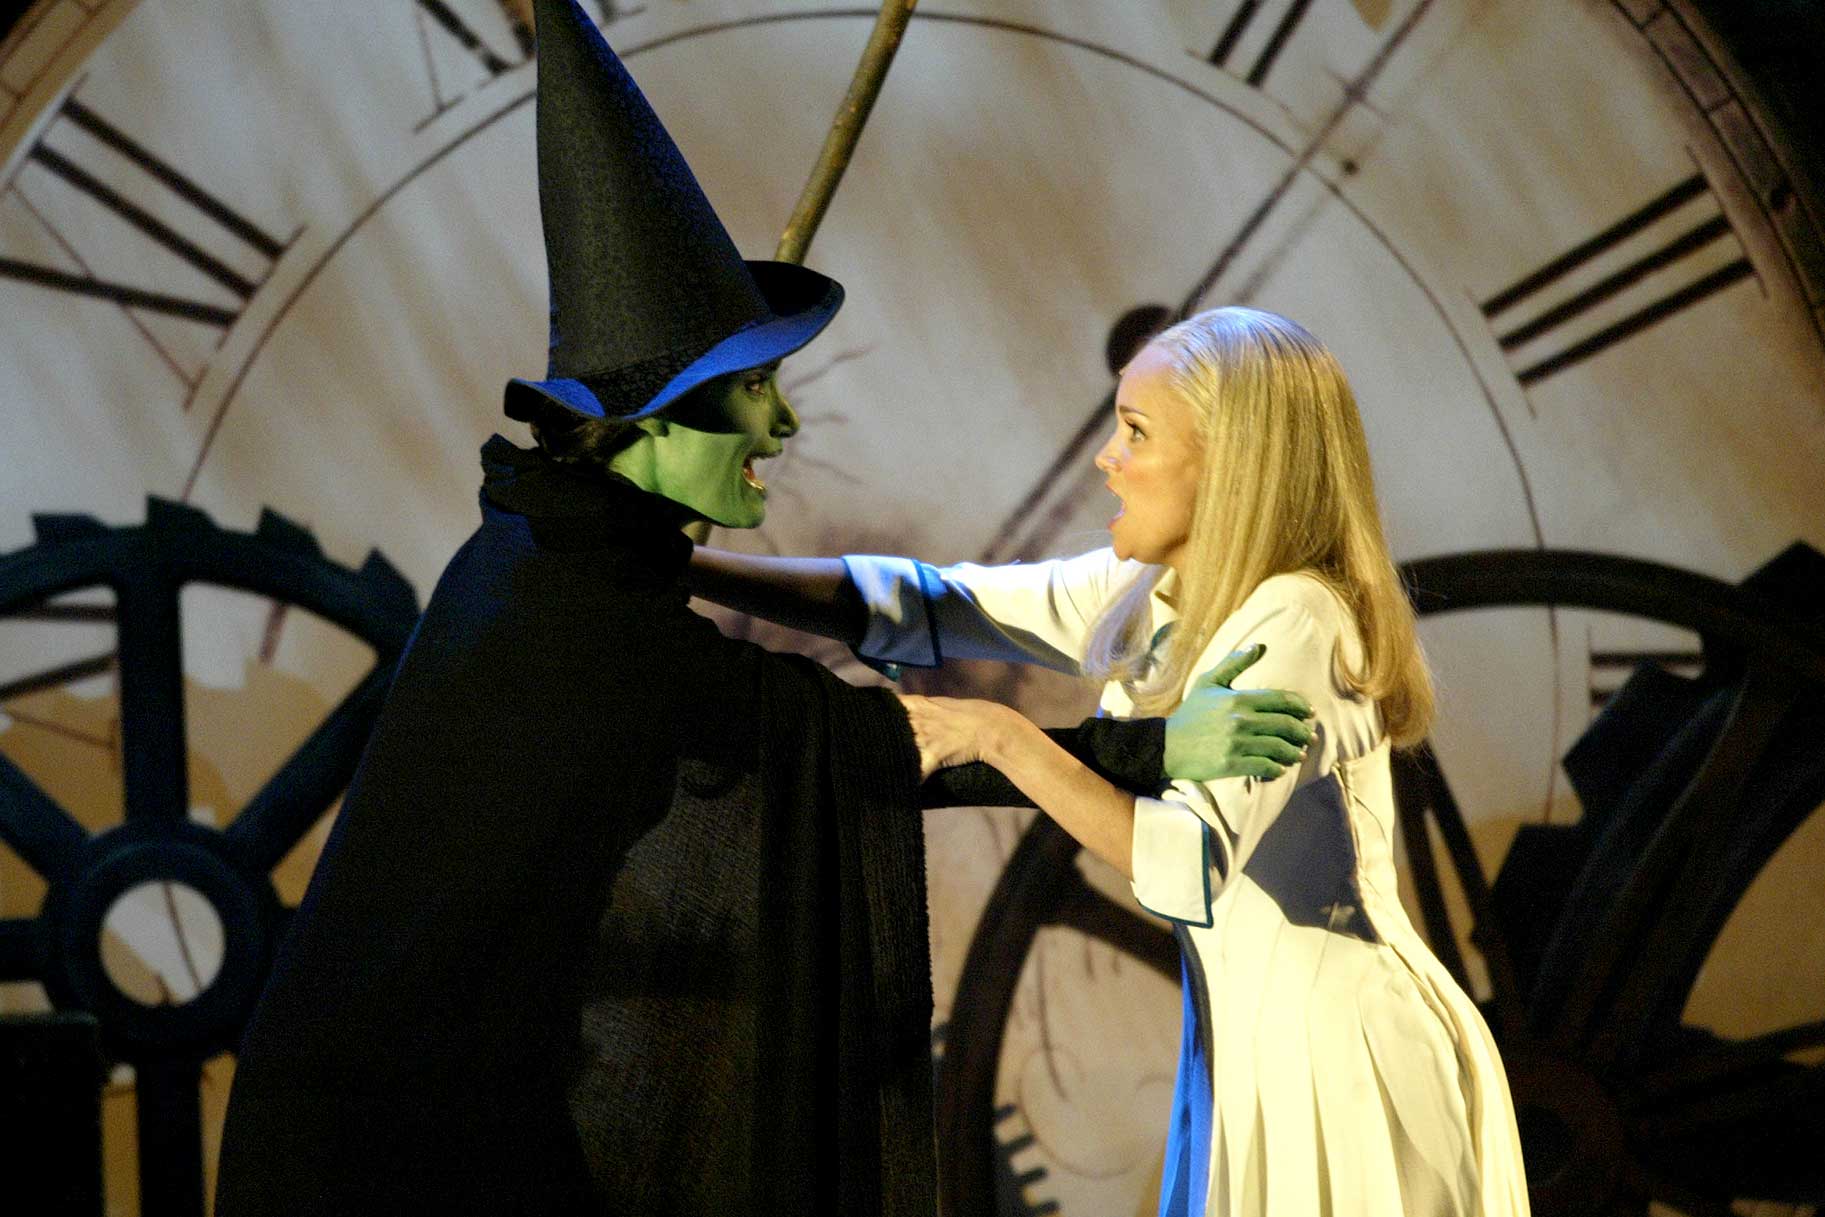 Idina Menzel and Kristen Chenoweth of Wicked perform on stage